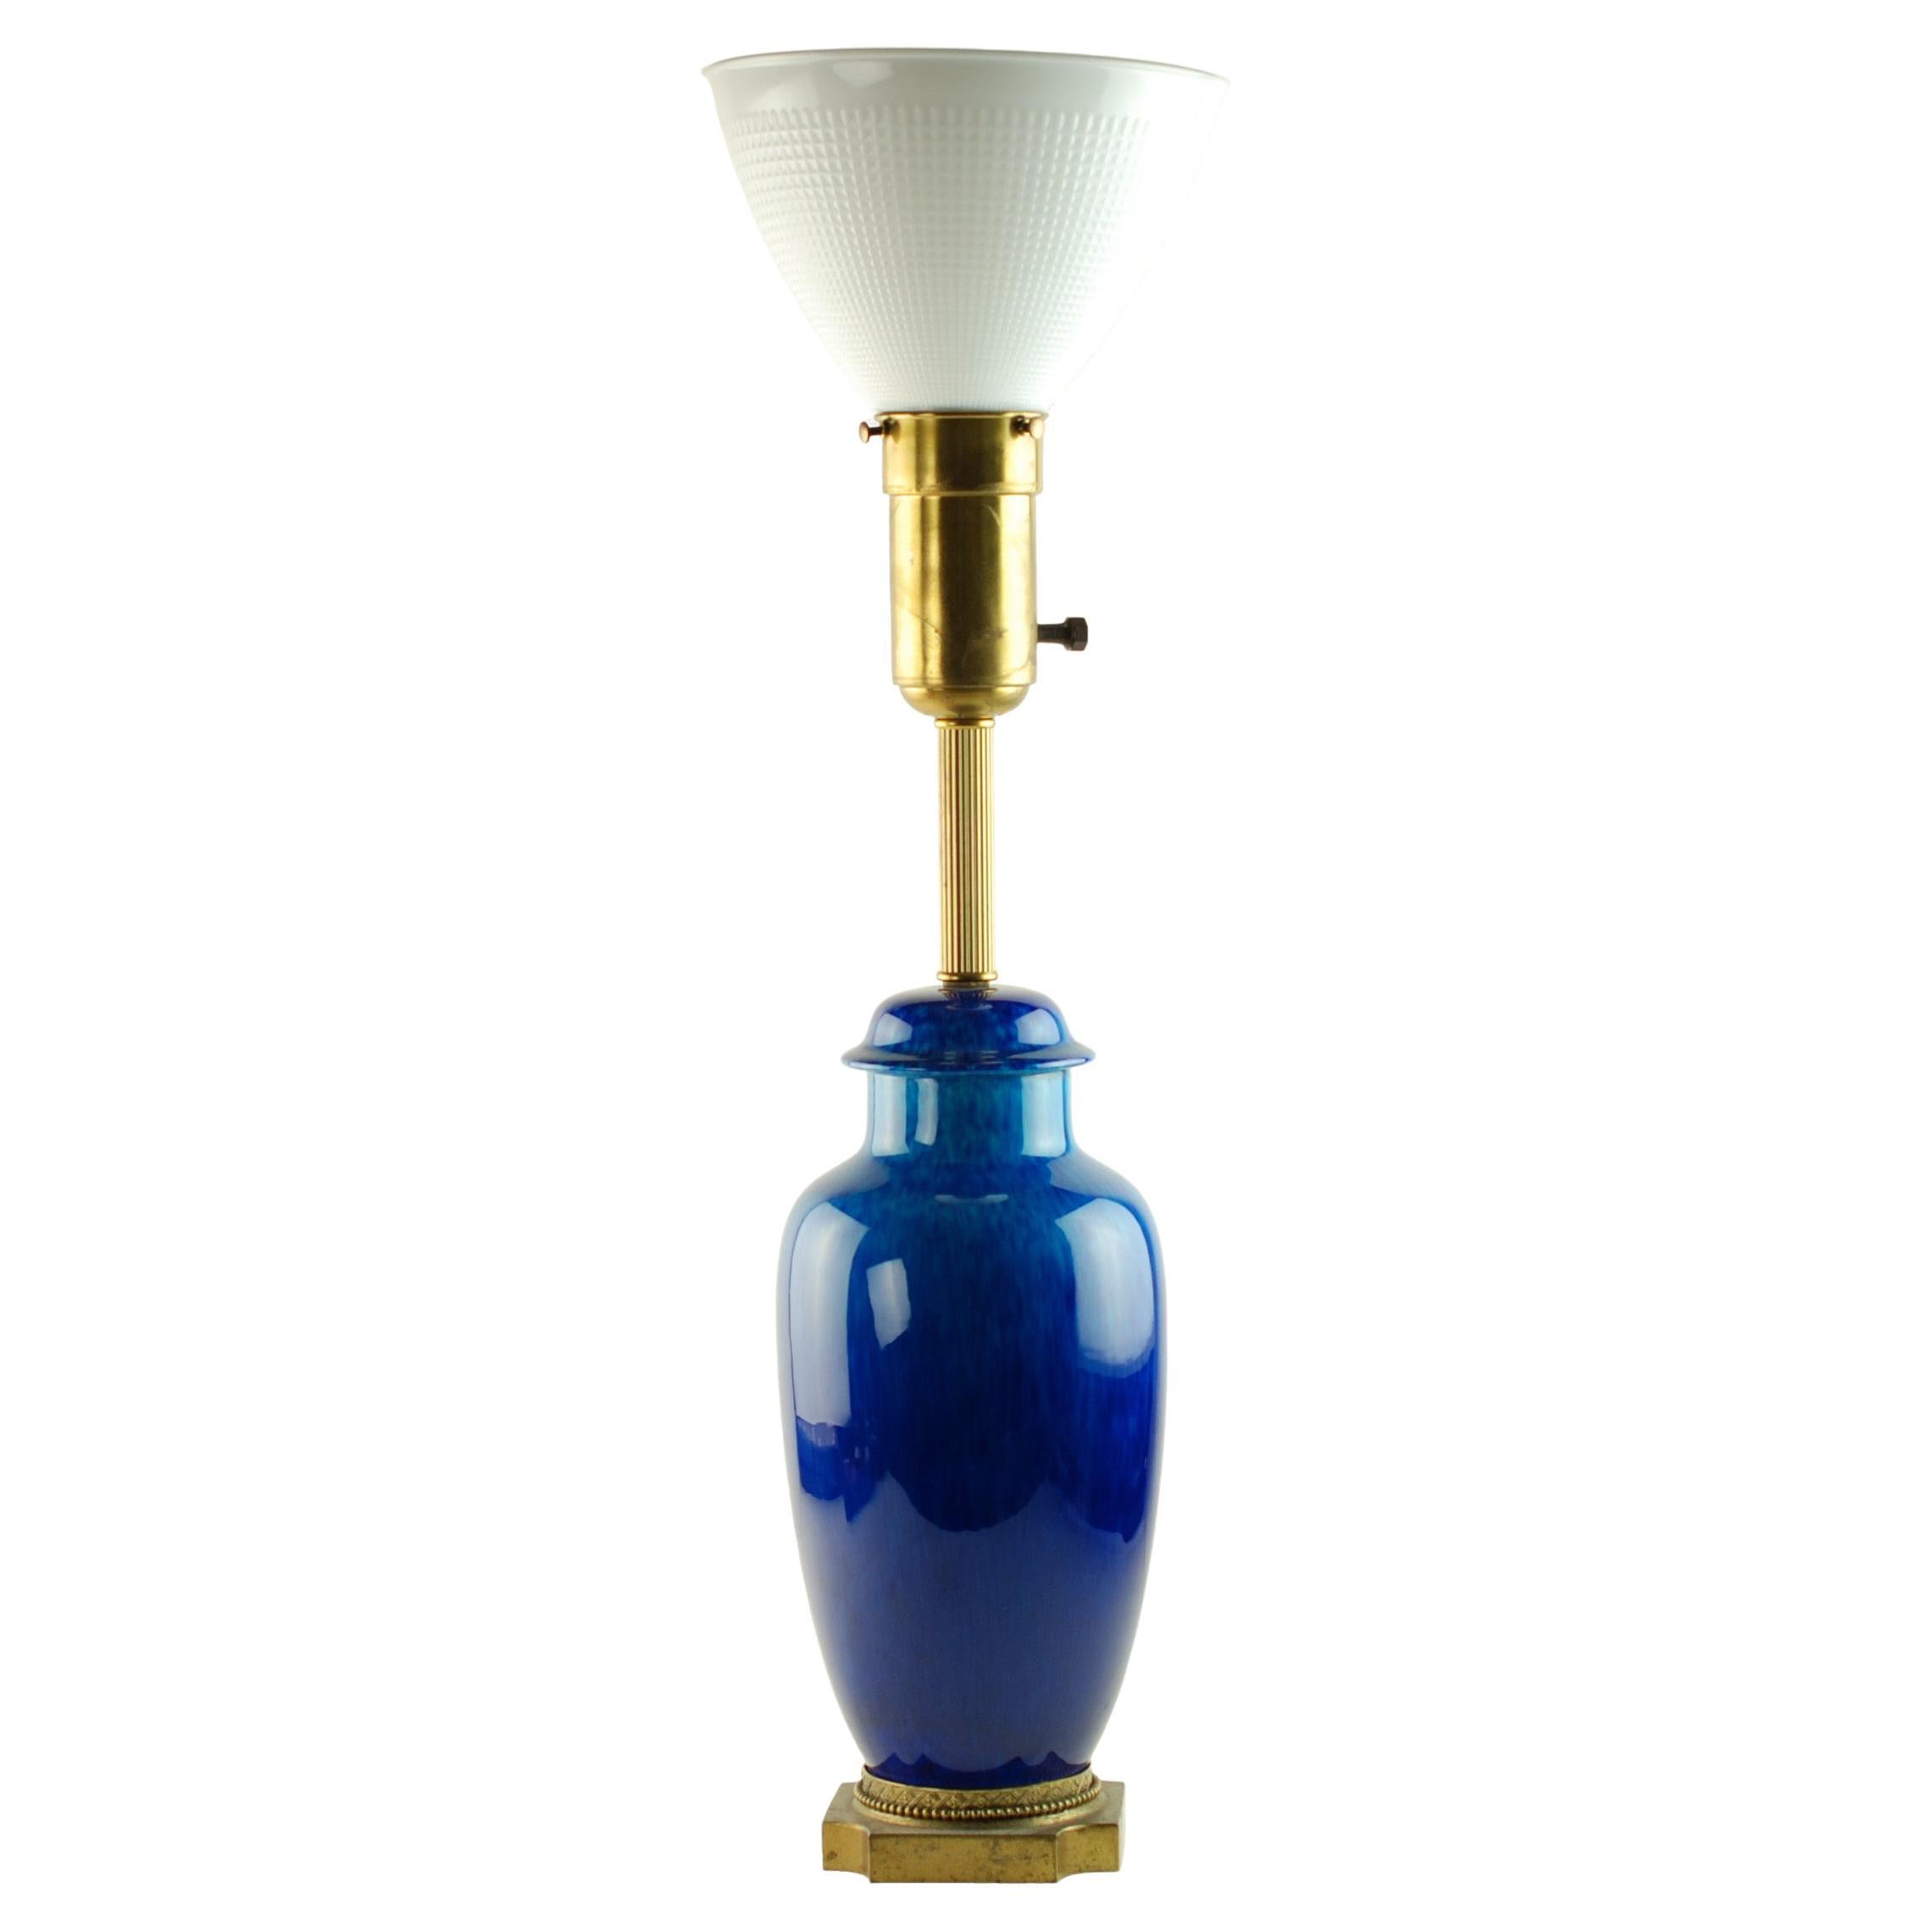 Paul Milet for Sèvres Azure Art Deco Table Lamp with Glass Diffuser Shade